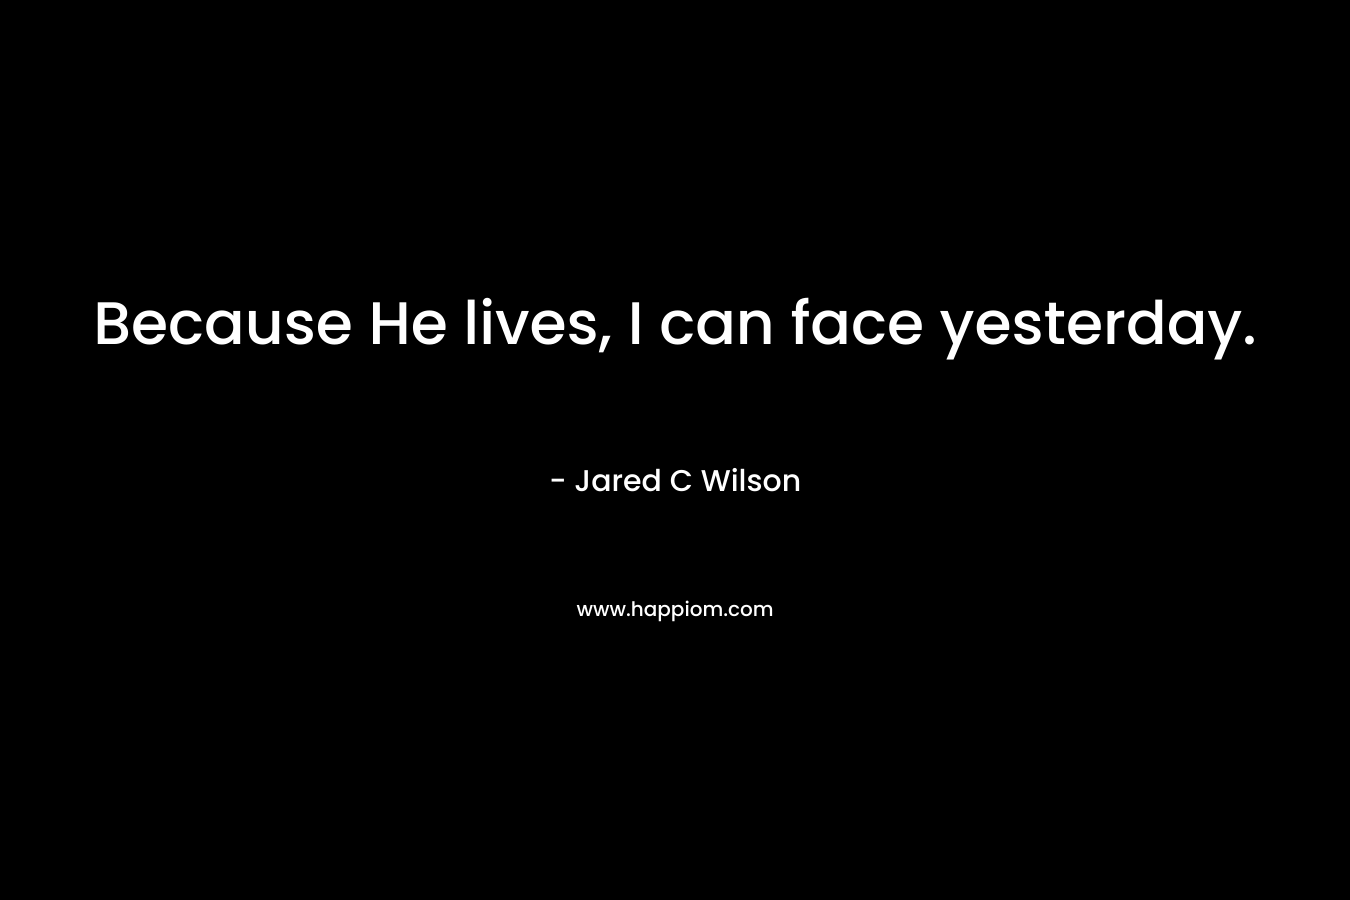 Because He lives, I can face yesterday. – Jared C Wilson